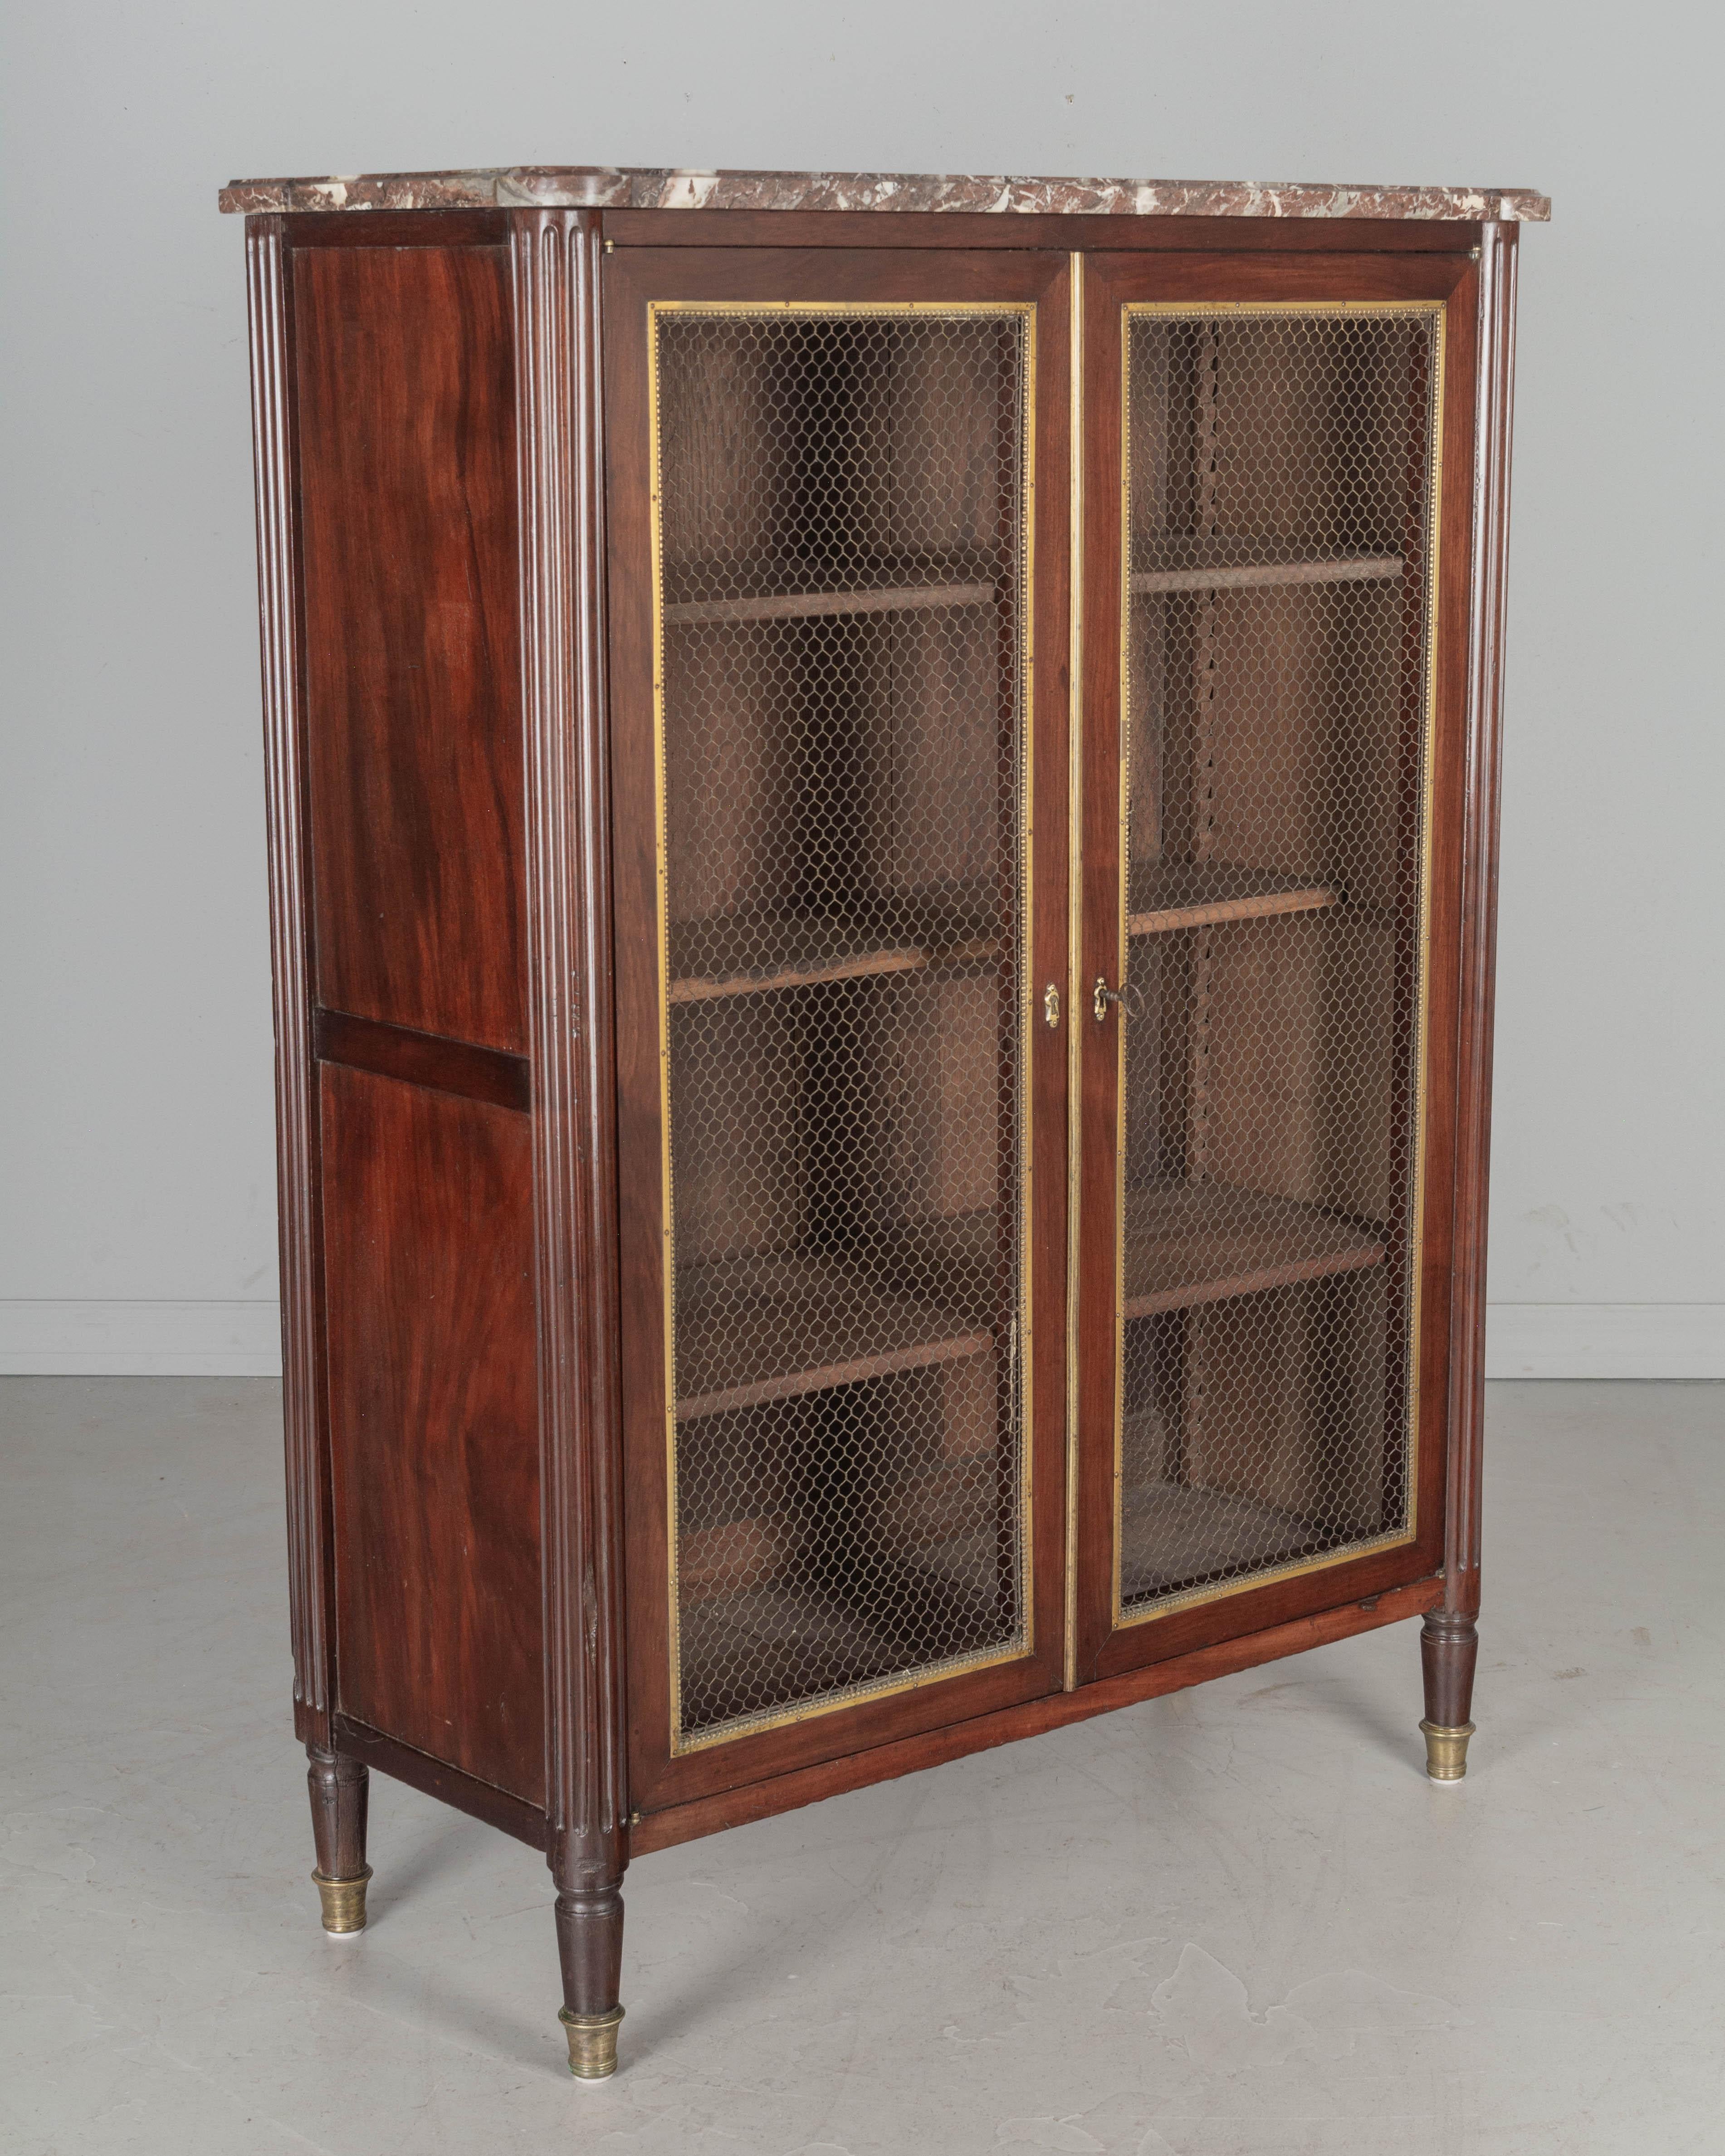 An early 19th Century French Louis XVI style marble top bibliotheque, or bookcase. Made of solid mahogany and retaining a nice high gloss luster finish. Brass grillage doors with decorative beaded brass trim, working lock and key. Rounded fluted